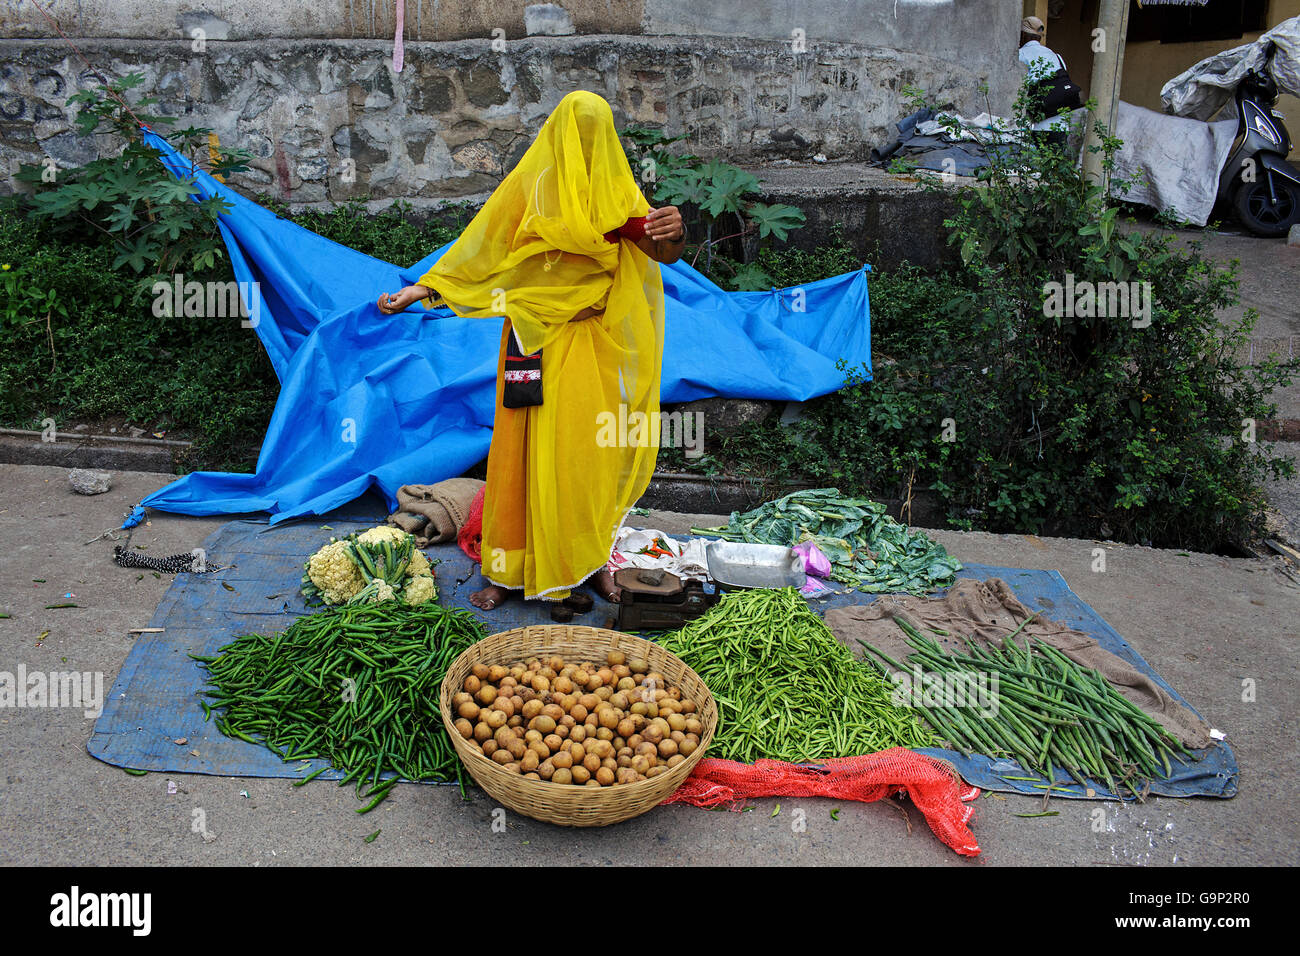 A woman vegetable vendor at the weekly market in Kamshet, India. Stock Photo